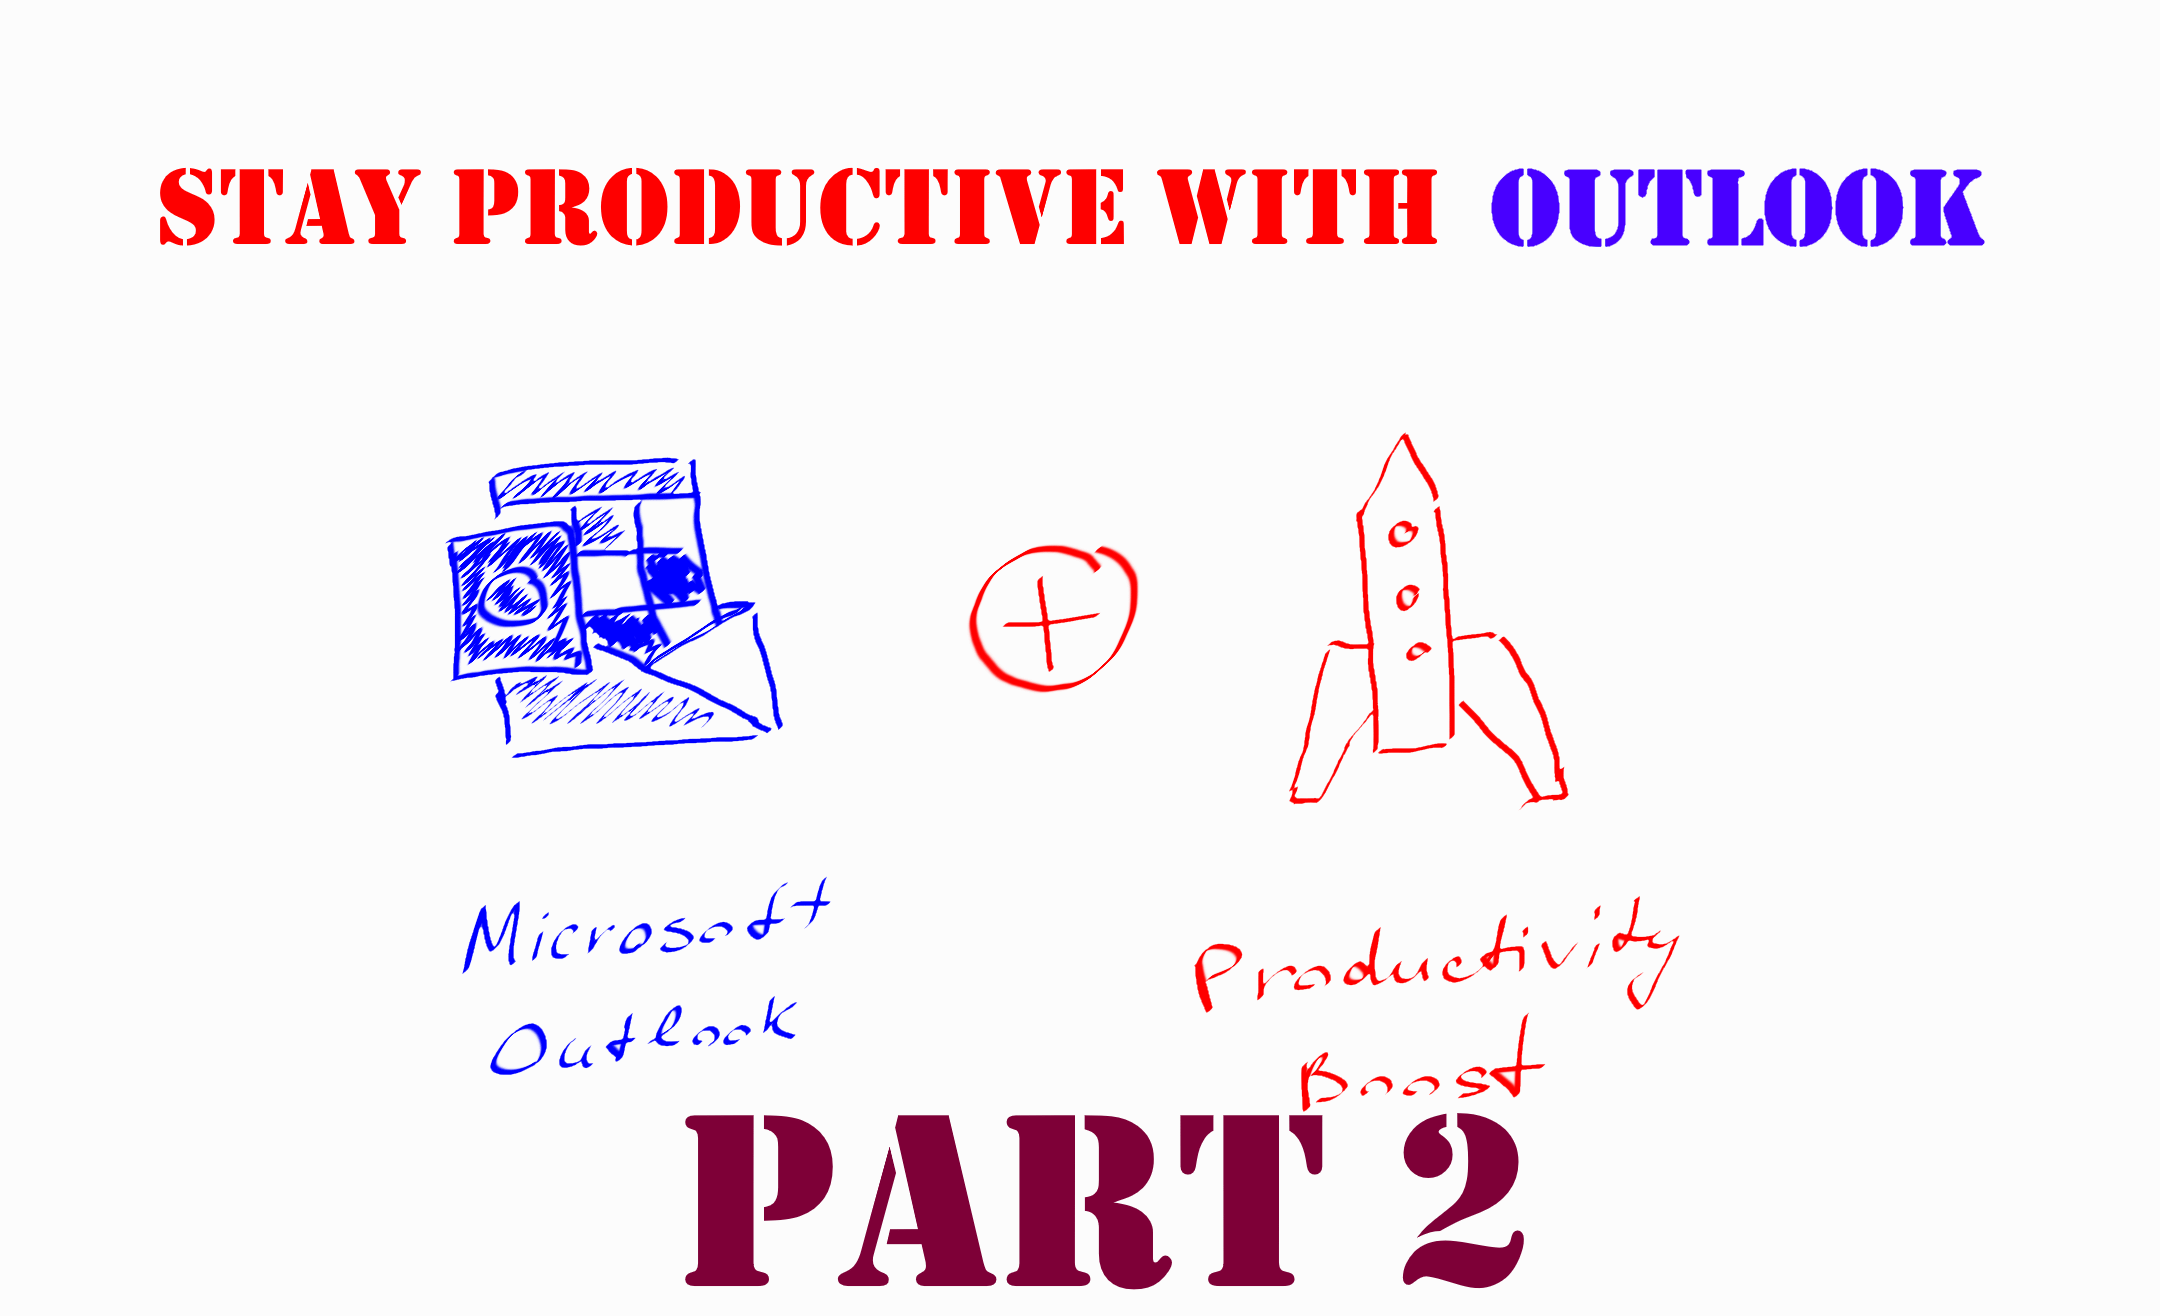 How to use Microsoft Outlook to stay productive - Part 2